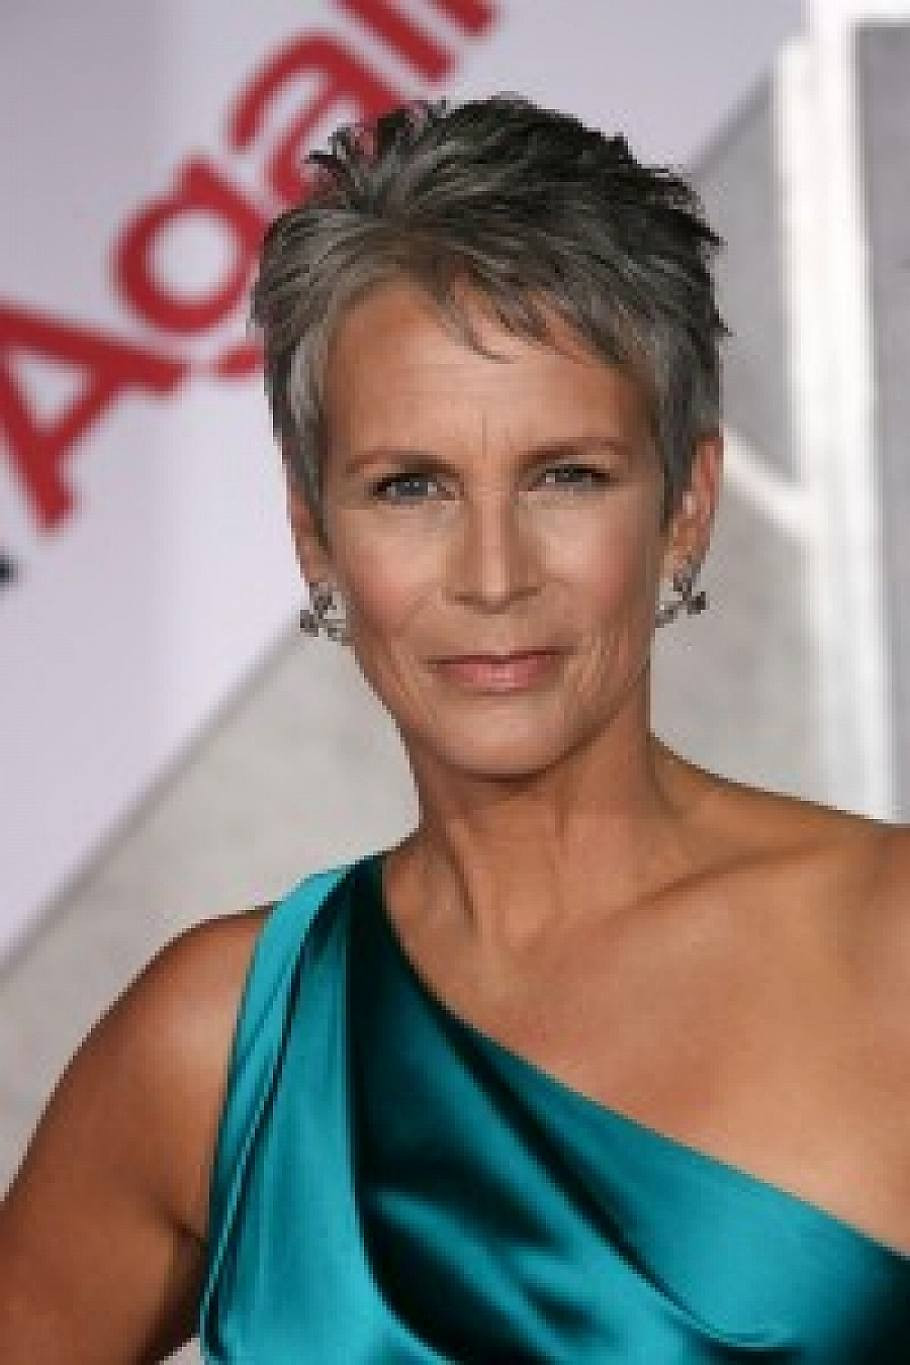 Short Hairstyles For Women Over 50 With Fine Hair
 Very Short Hairstyles For Women Over 50 Fave HairStyles